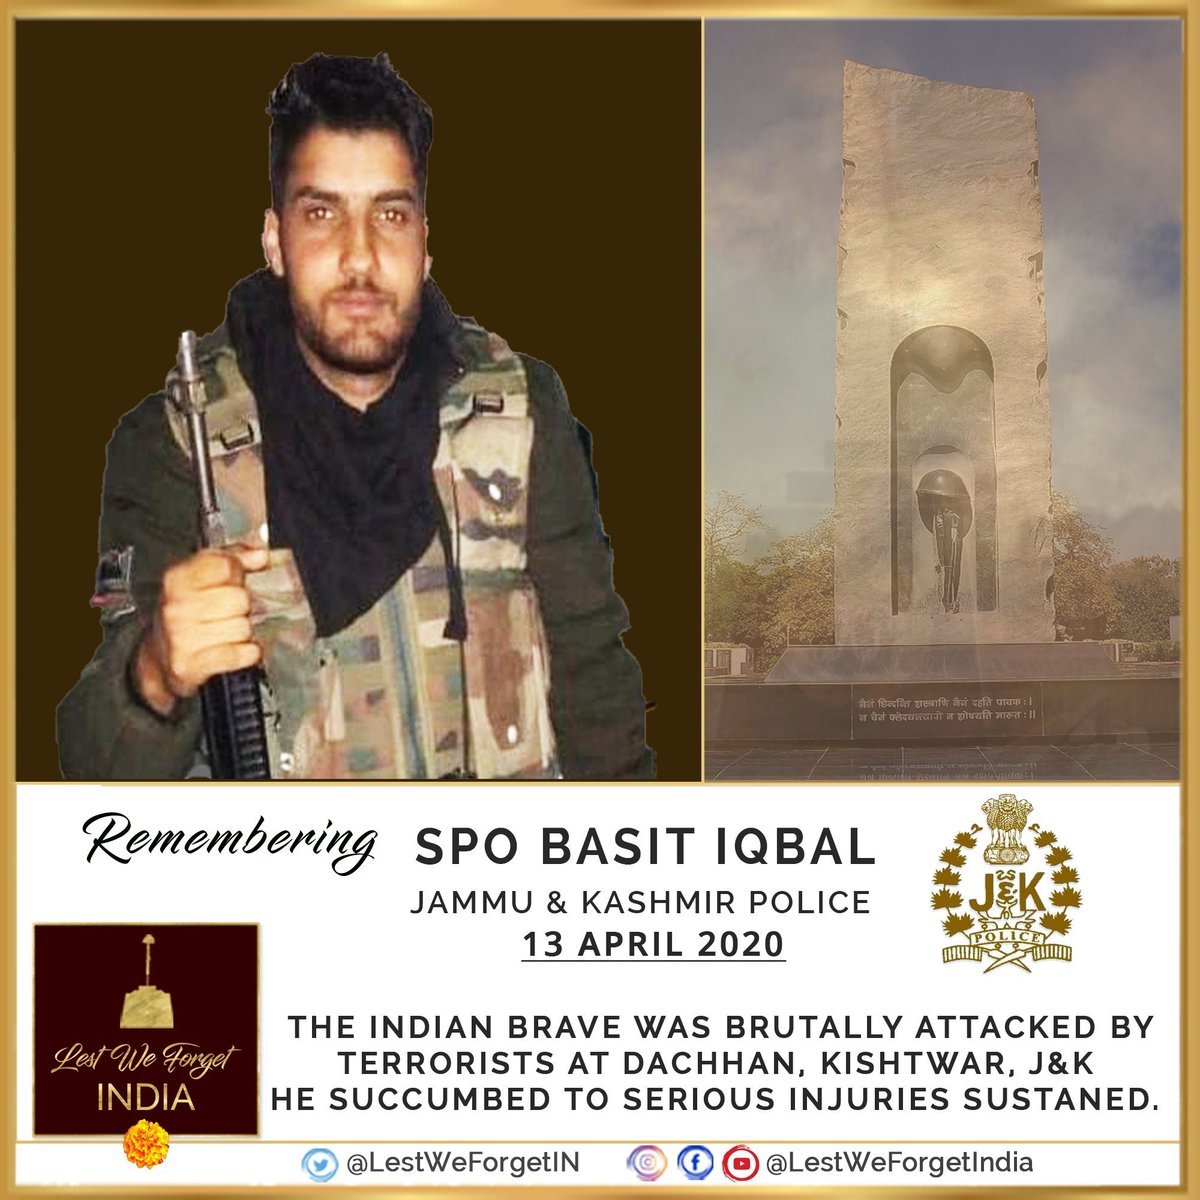 A dastardly attack on Iqbal Basit, Special Police Officer of @JmuKmrPolice, #OnThisDay 13 April in 2020 at Dachan, Kishtwar, J&K #LestWeForgetIndia🇮🇳 the valiant #IndianBrave, and his supreme sacrifice for the Nation🏵️